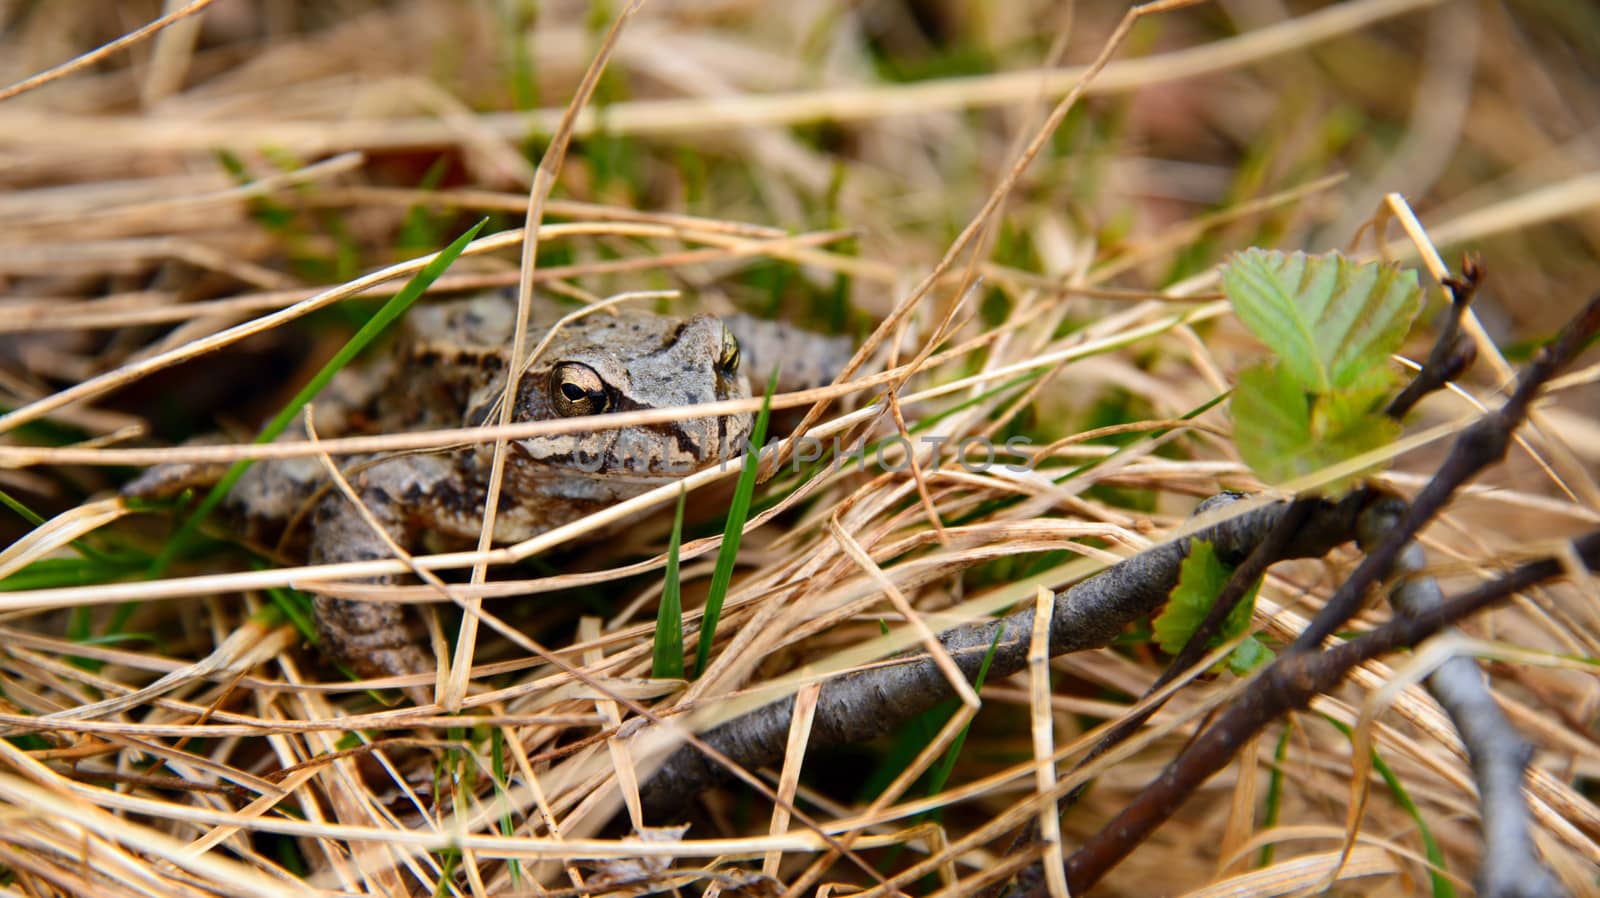 Toad hiding in grass by GryT